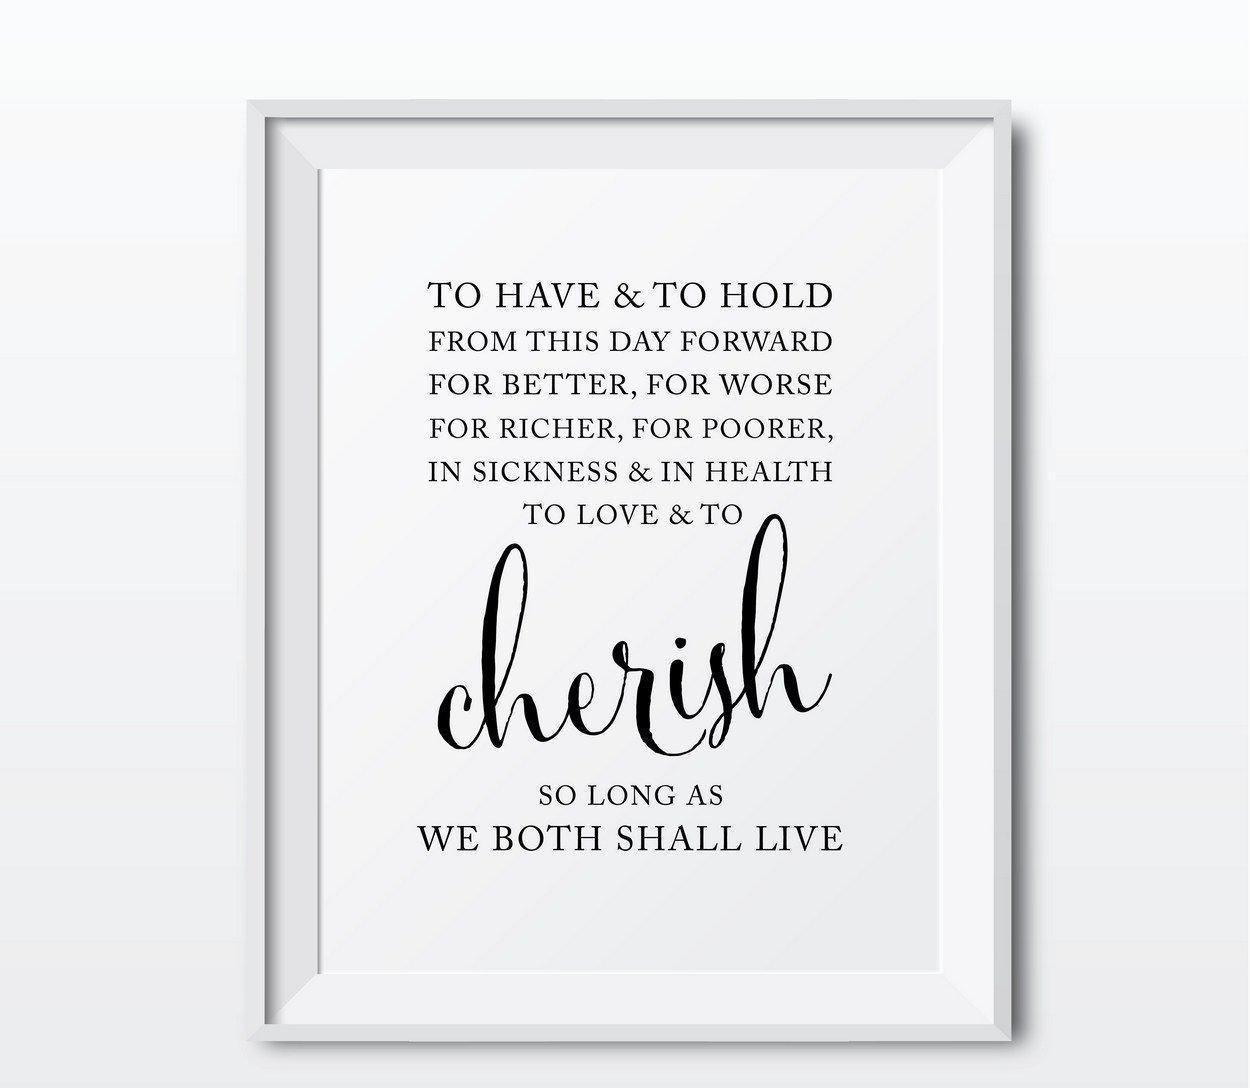 Wedding Love Quote Wall Art Prints, Modern Black and White-Set of 1-Andaz Press-Every heart sings a song...Plato-